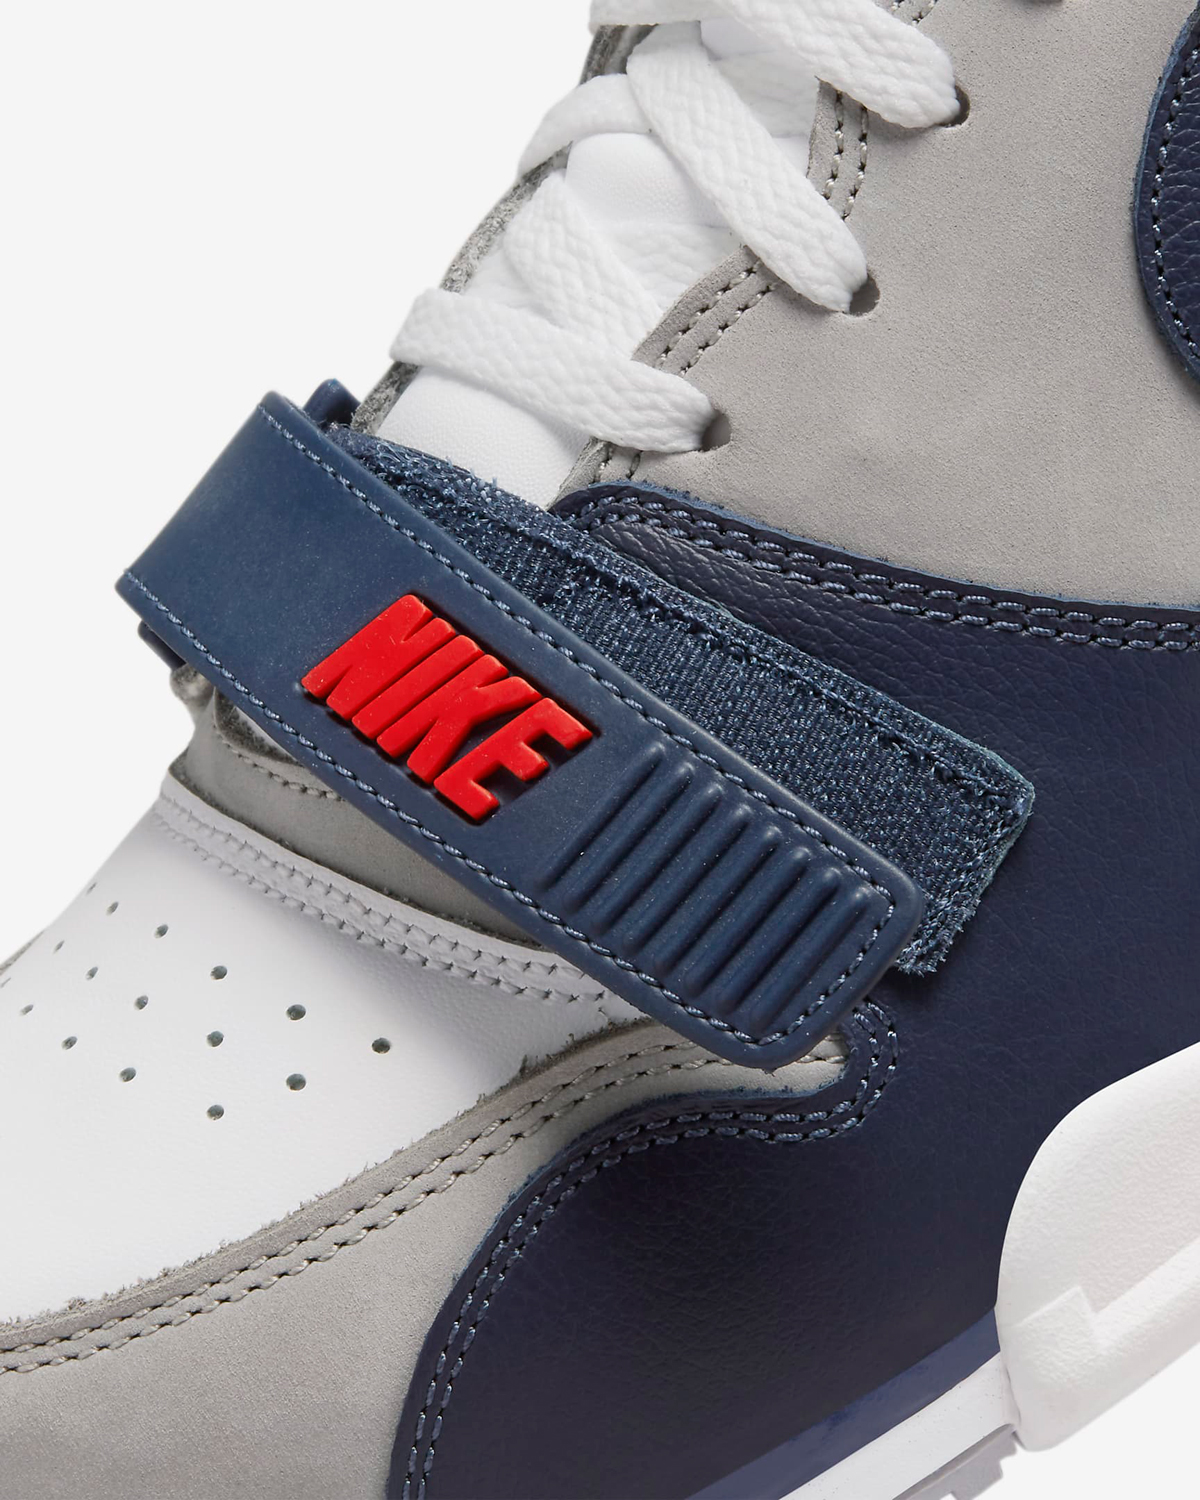 nike-air-trainer-1-midnight-navy-release-date-9